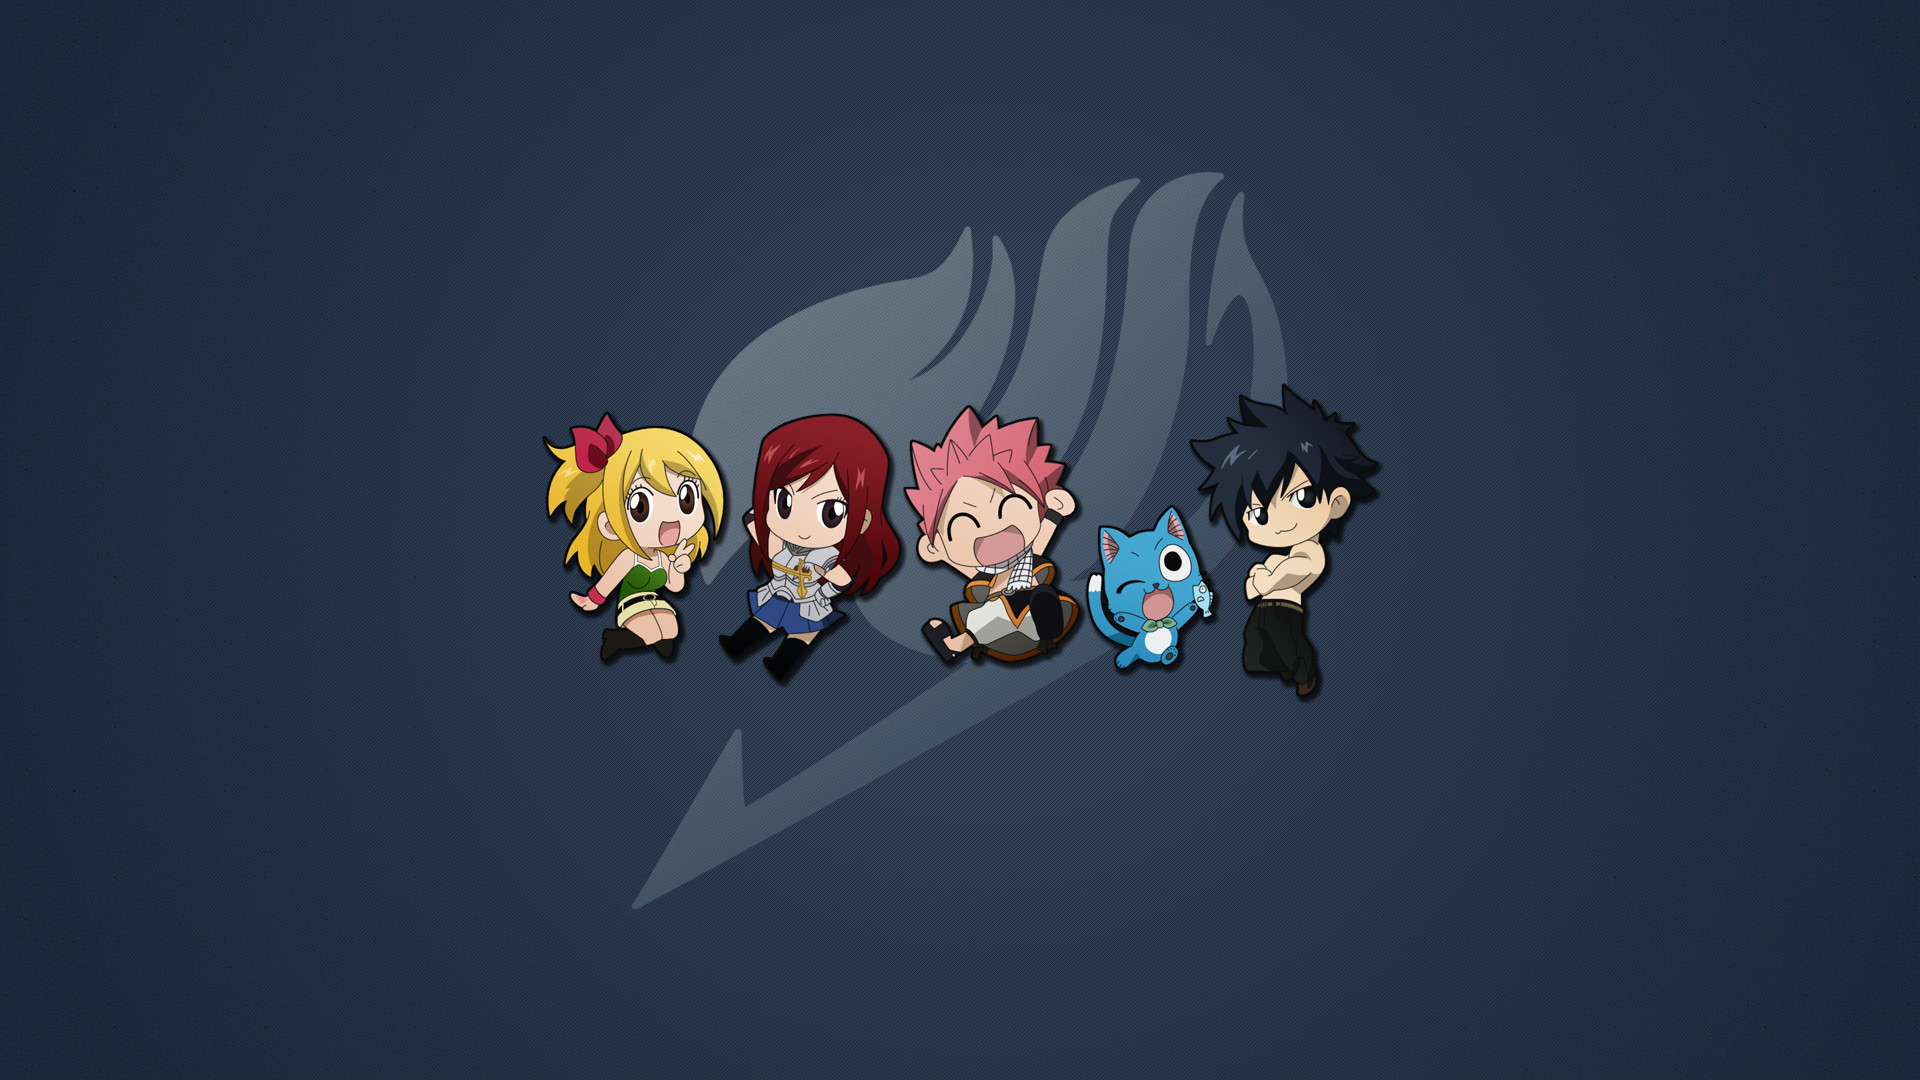 1920x1080 FAIRY TAIL Â· download FAIRY TAIL image